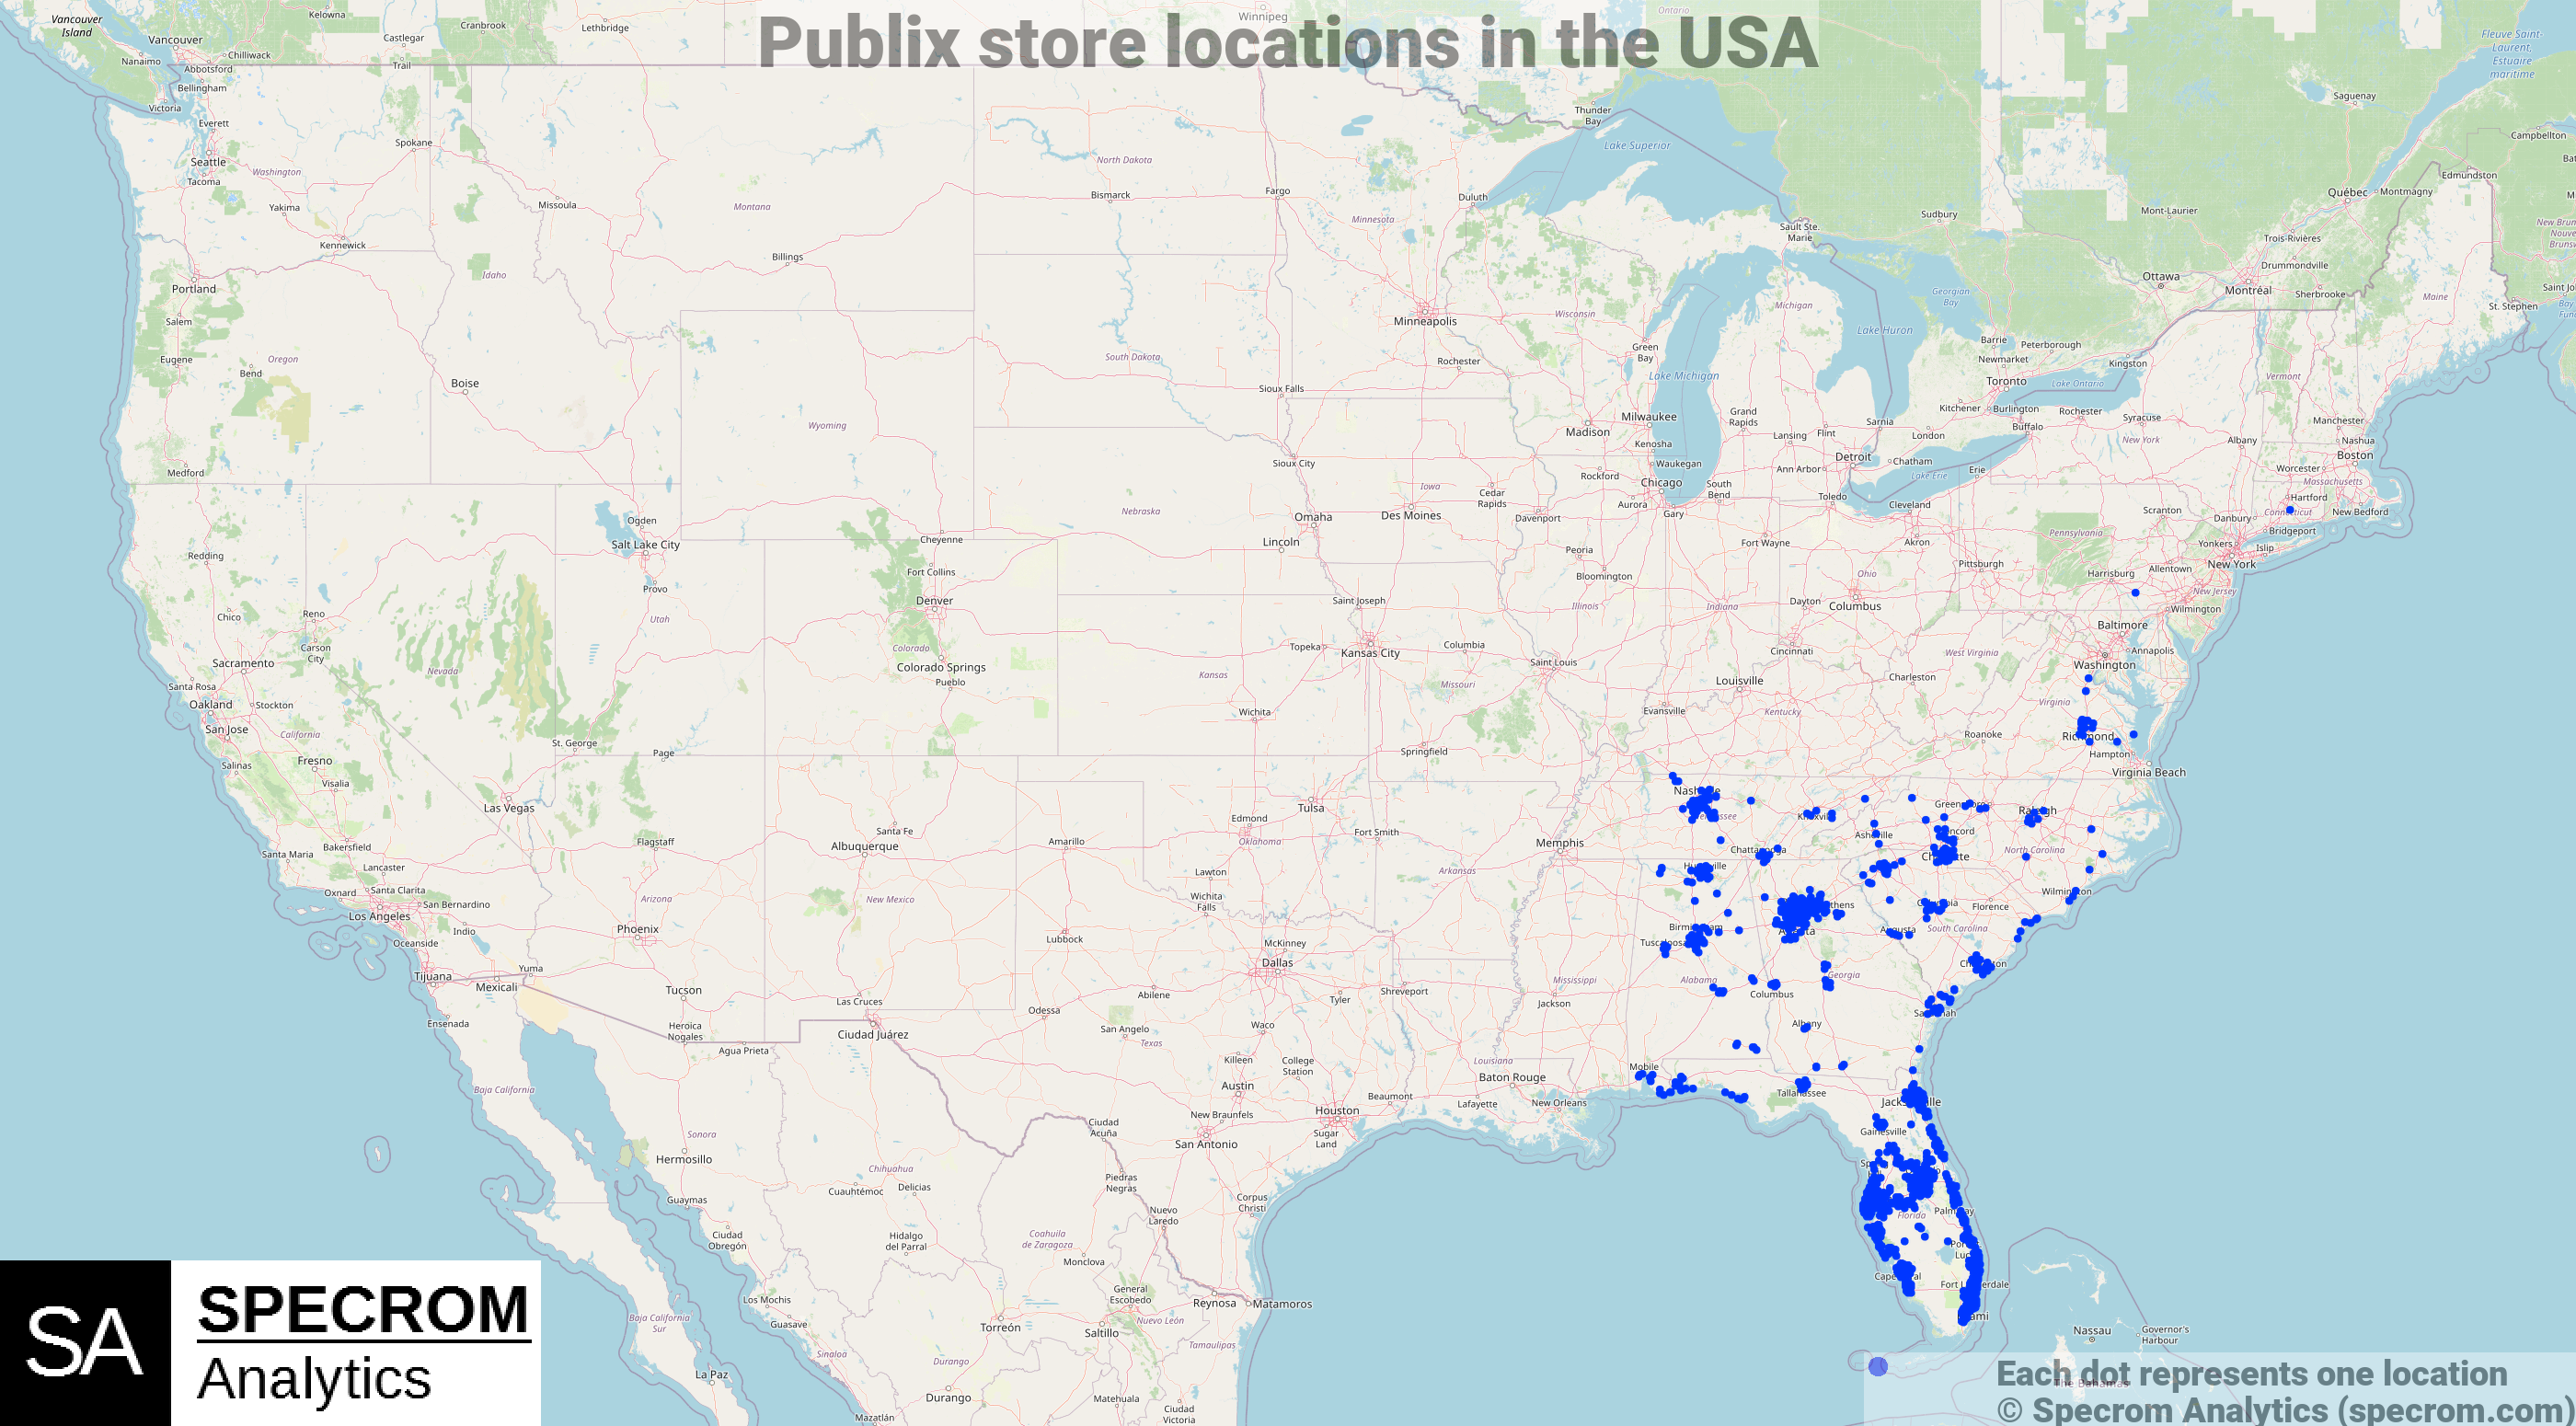 Publix store locations in the USA